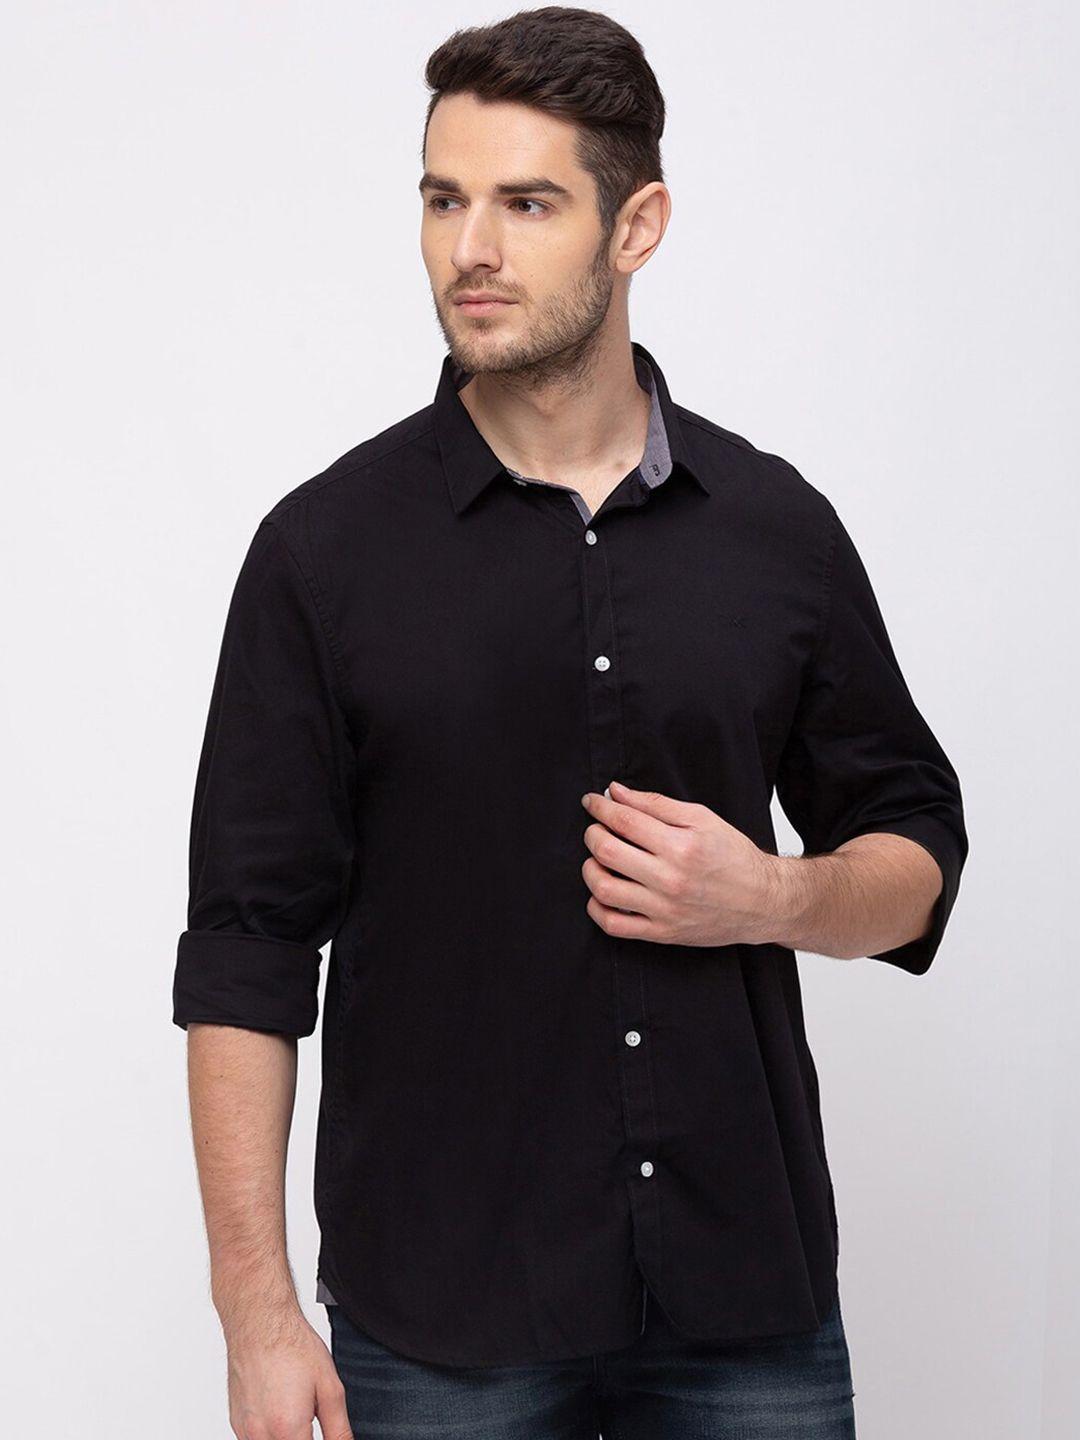 kenneth-cole-men-opaque-casual-shirt